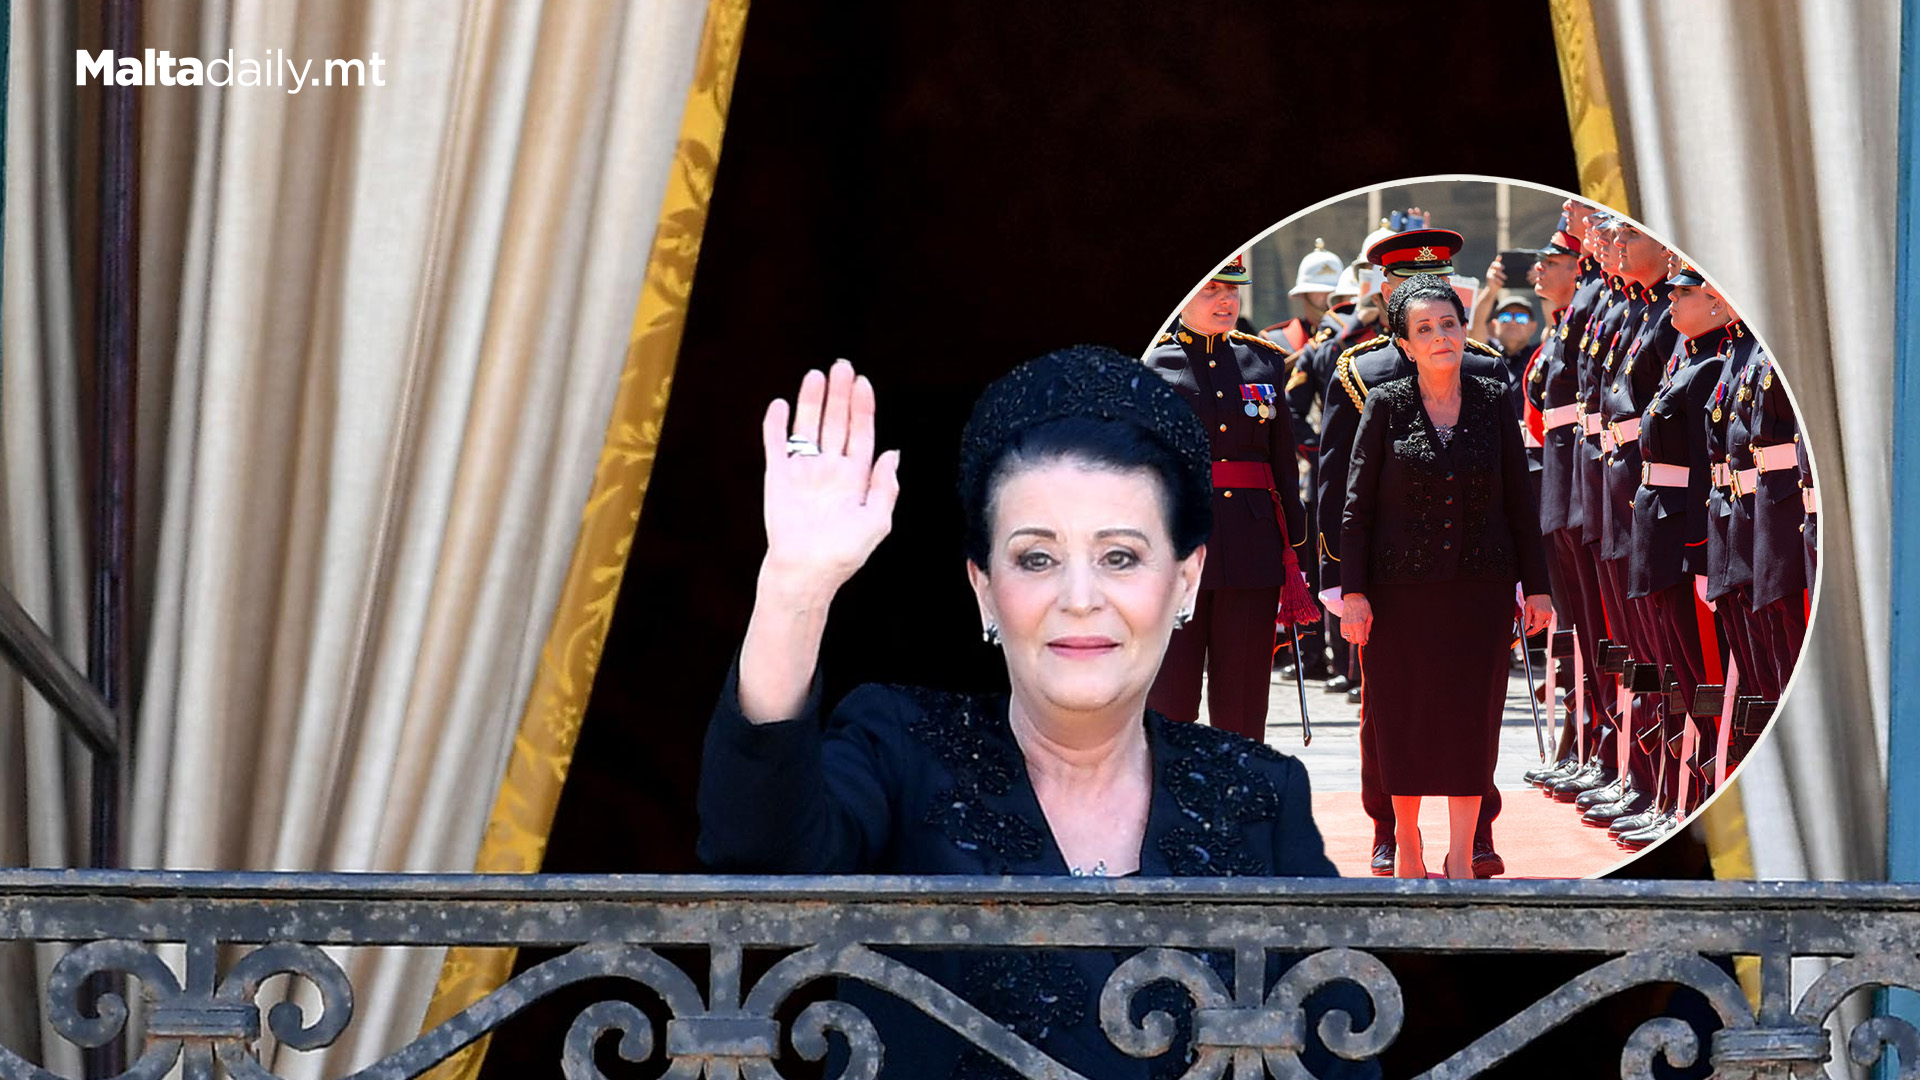 Highlights From Oath Of Office Of Malta's New President